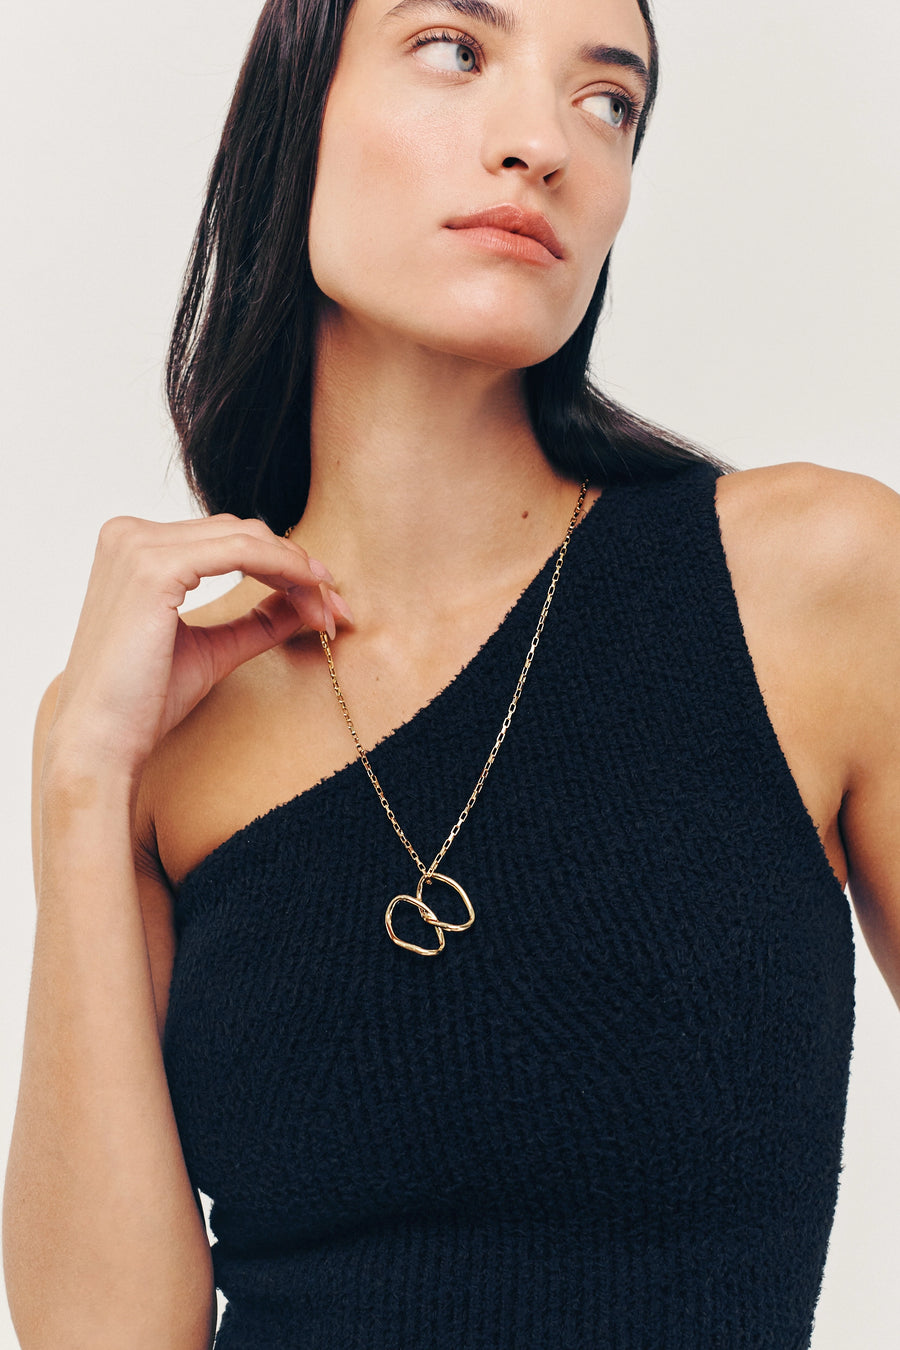 SAGE Necklace. Cable chain necklace with linked oval hoops pendant, 18K gold vermeil, handmade, hypoallergenic, water-resistant